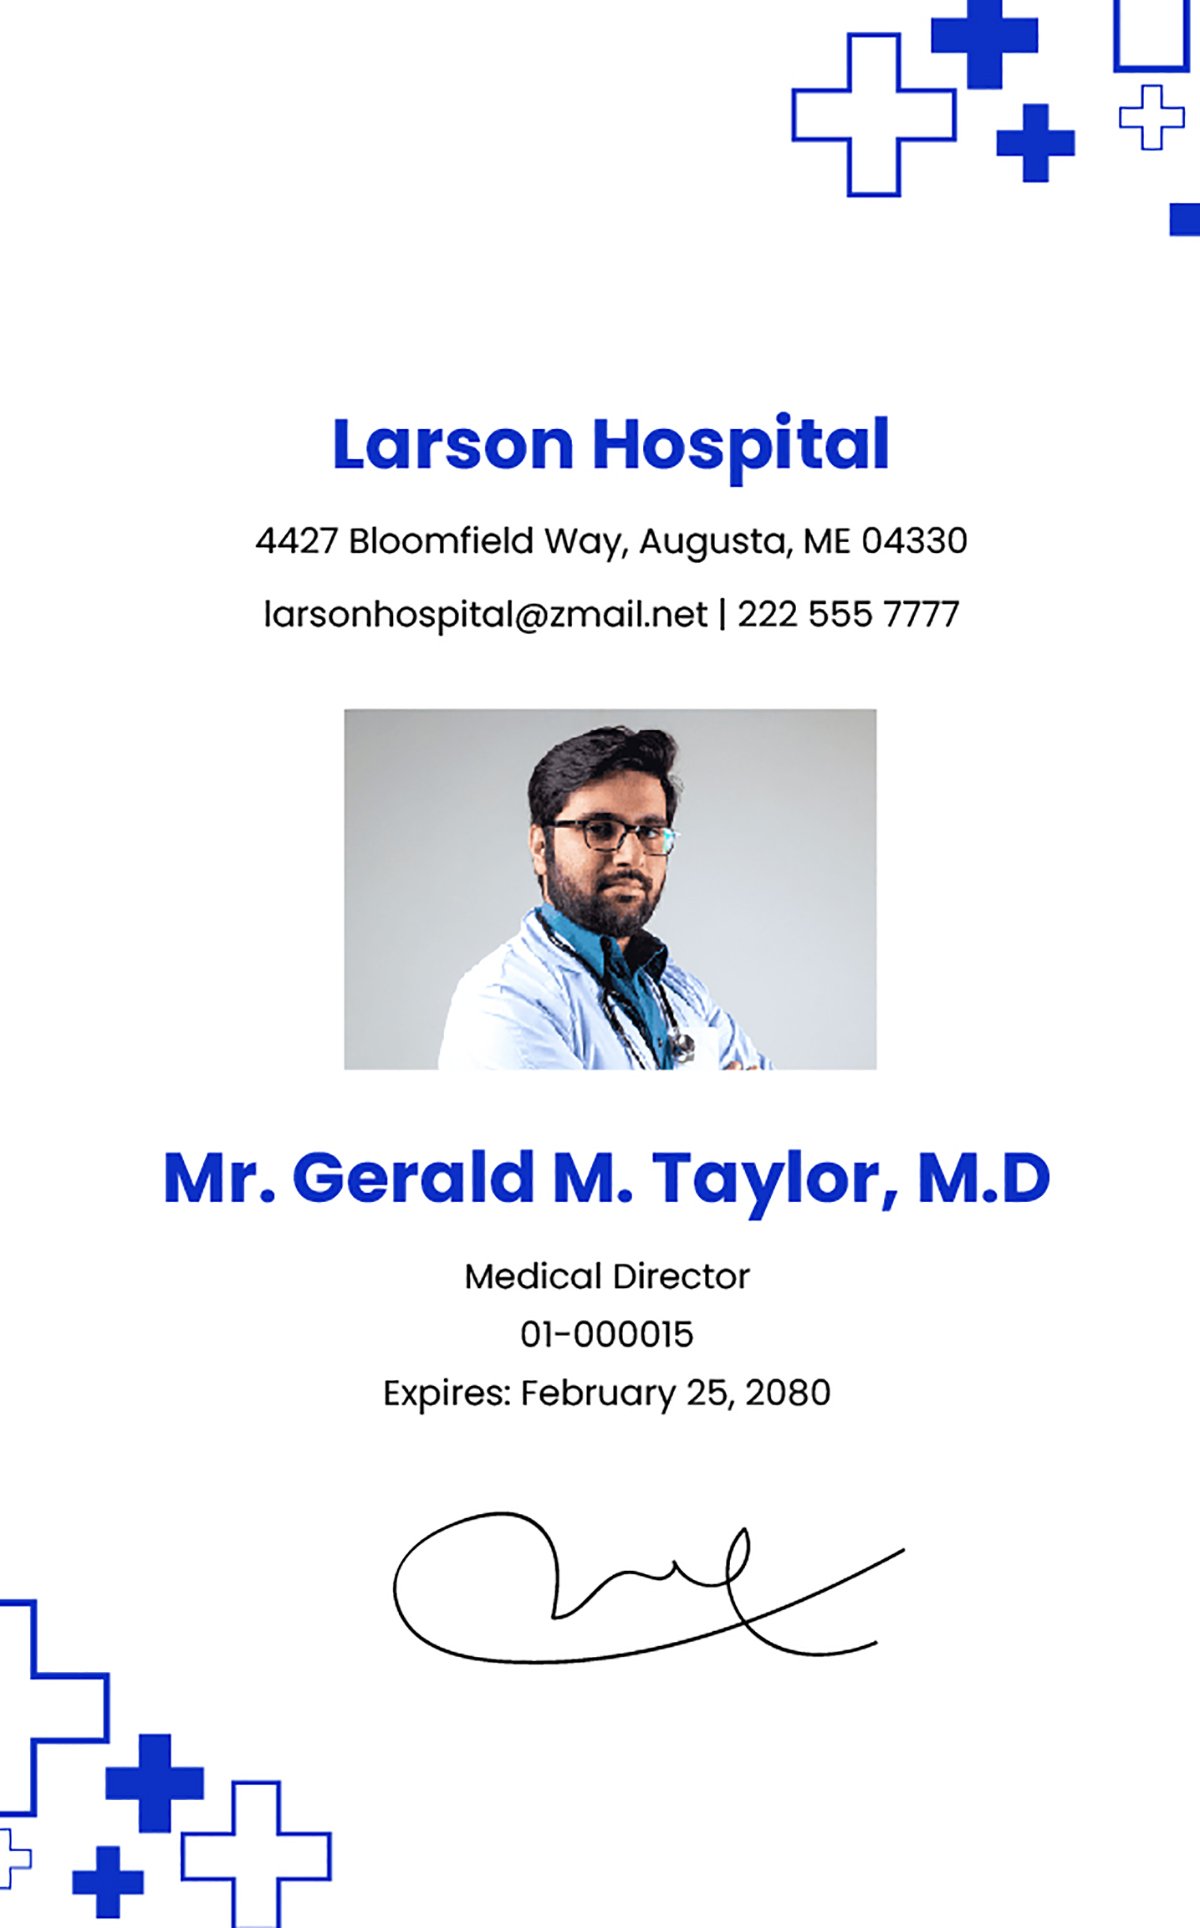 Medical Doctor ID Card Template in Word, Illustrator, PSD